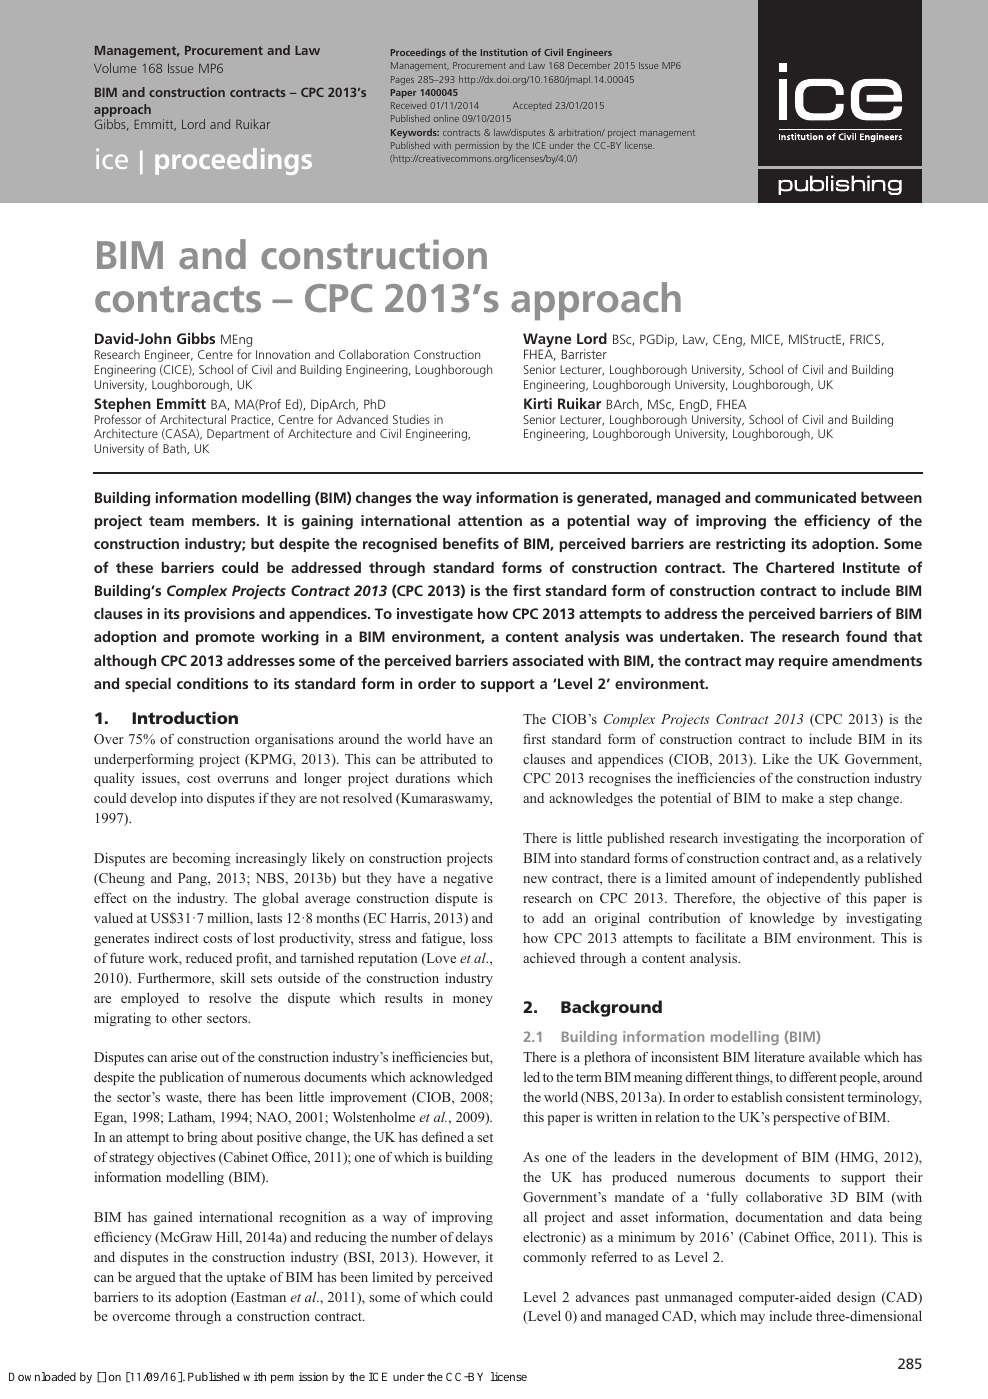 Bim And Construction Contracts Cpc 2013 S Approach Topic Of